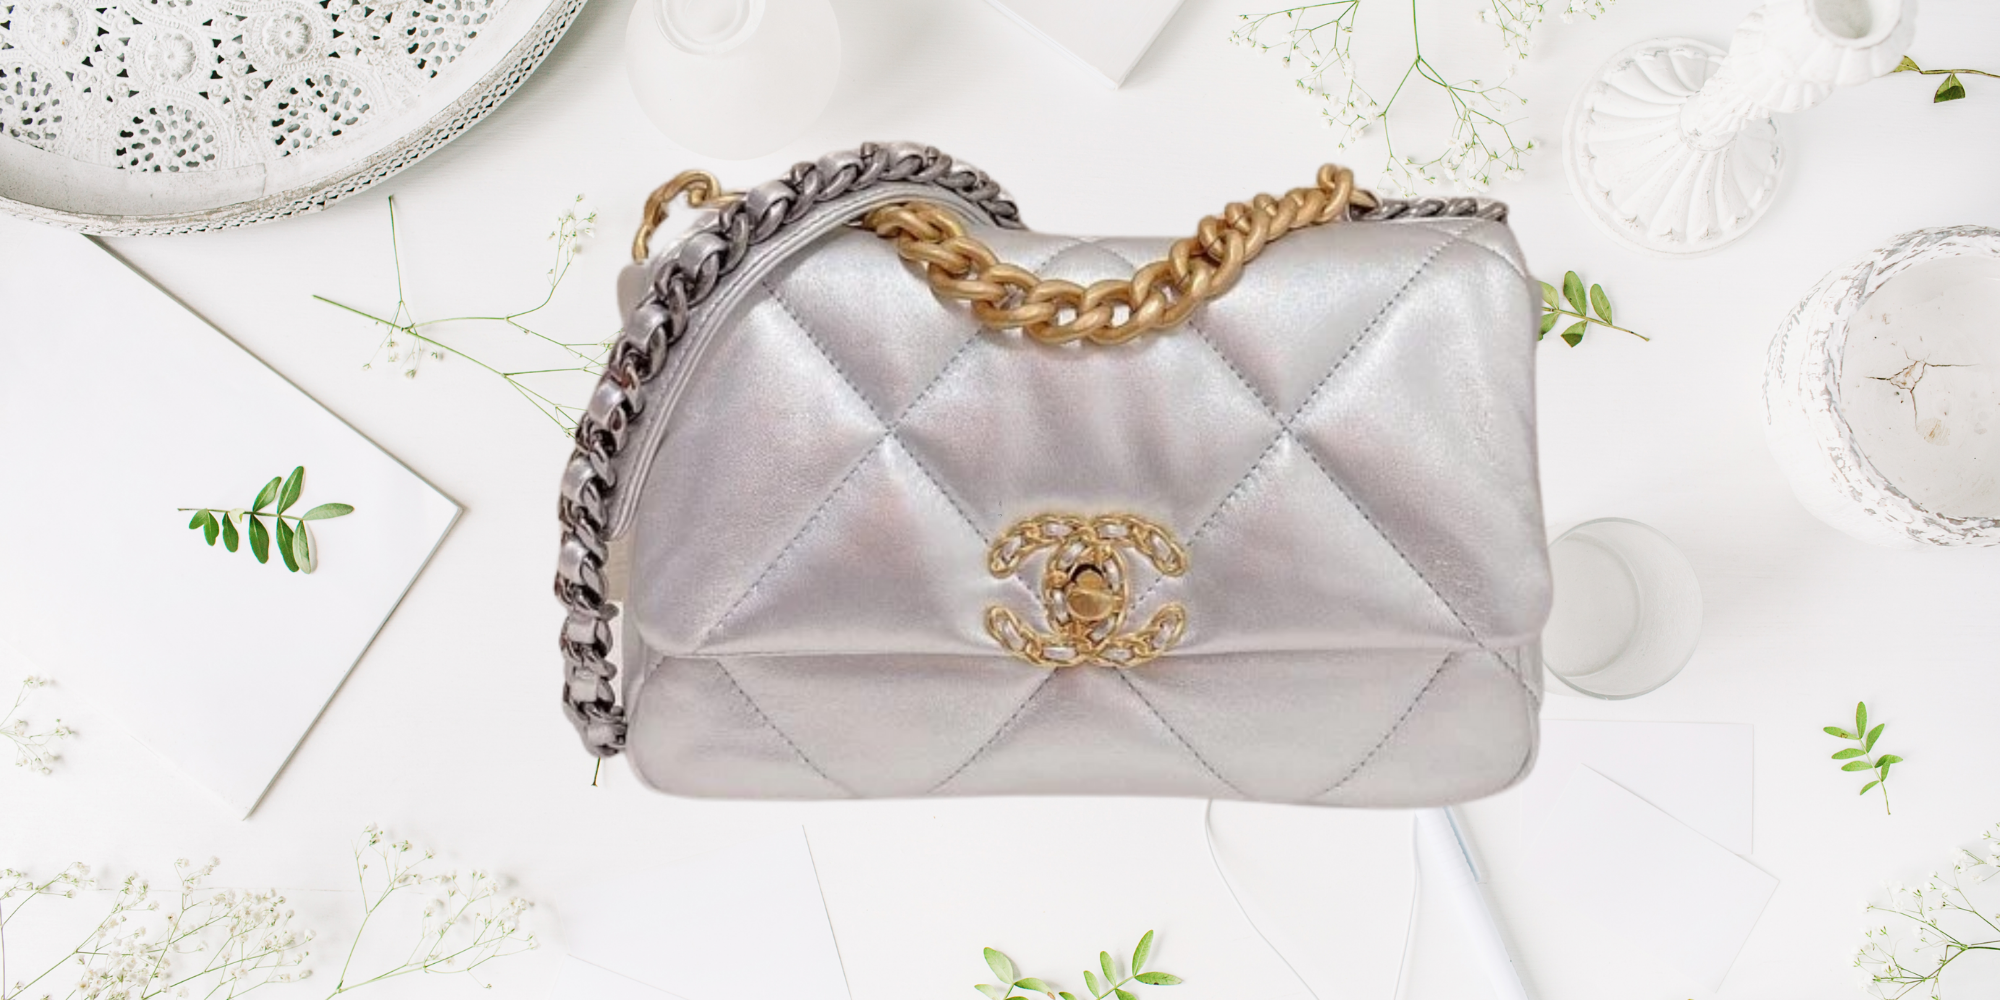 The Chanel 19: The Newest Must Have Chanel Bag, Handbags and Accessories